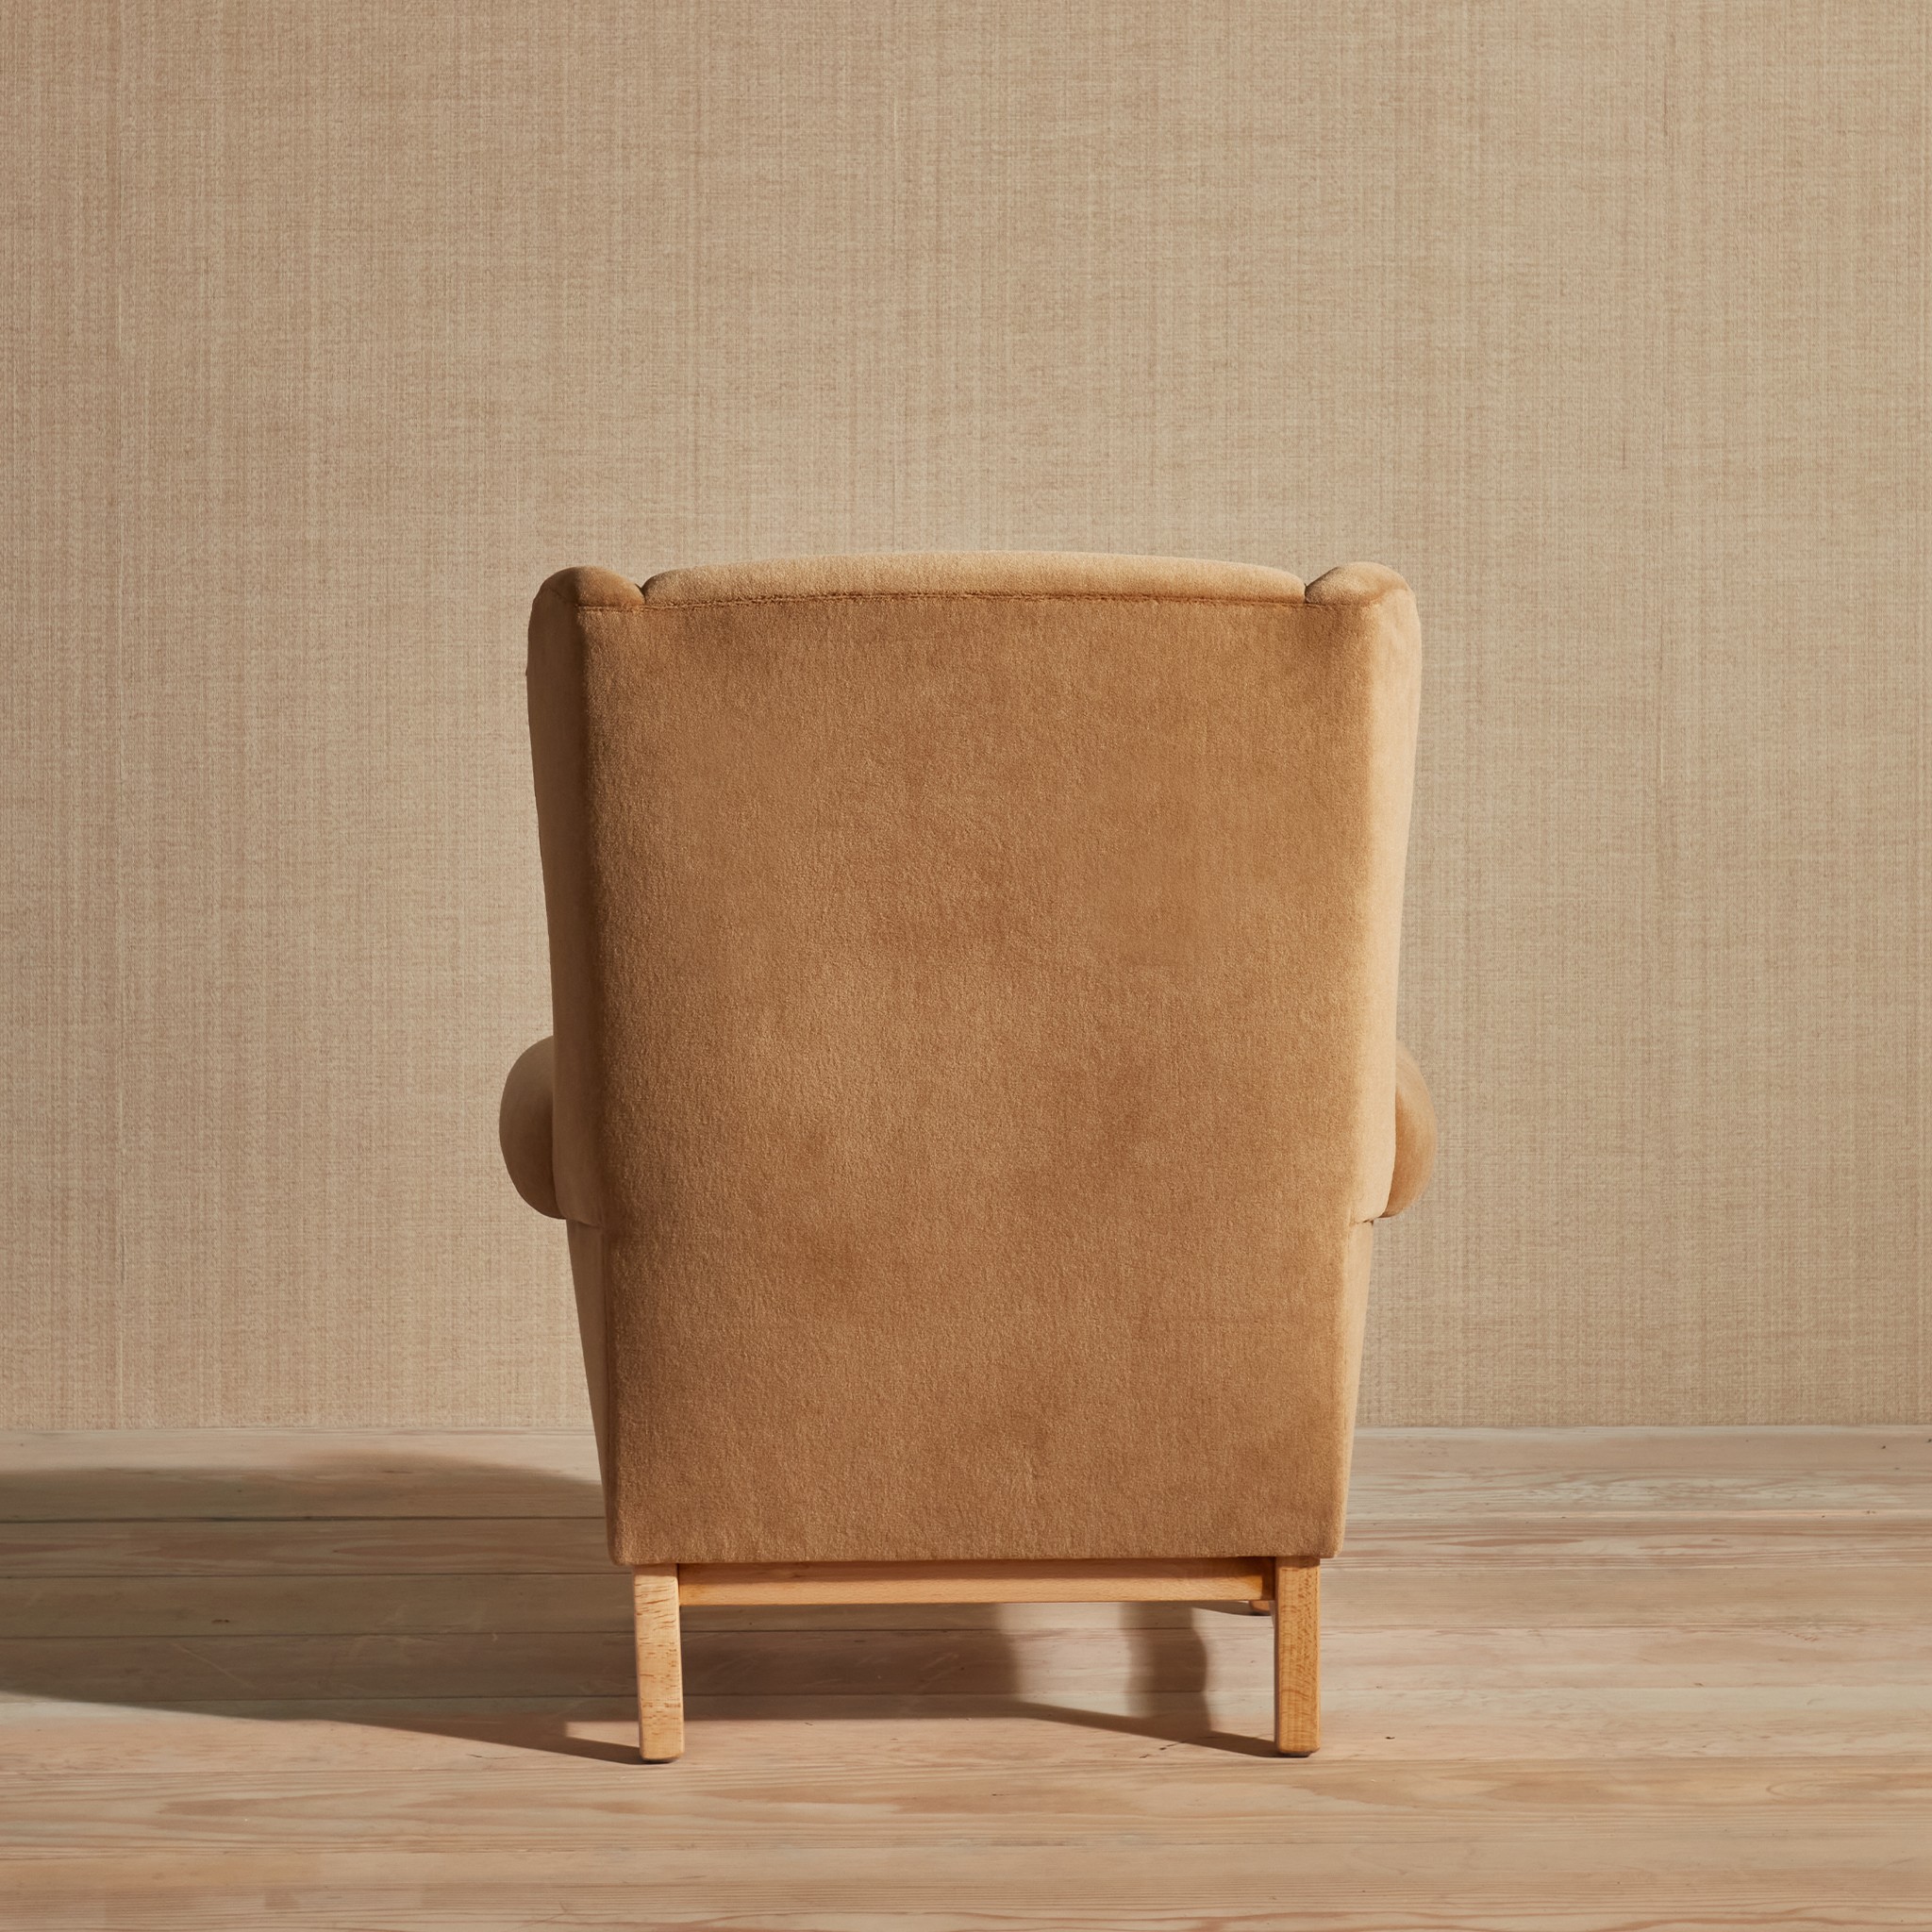 a brown chair sitting on top of a wooden floor